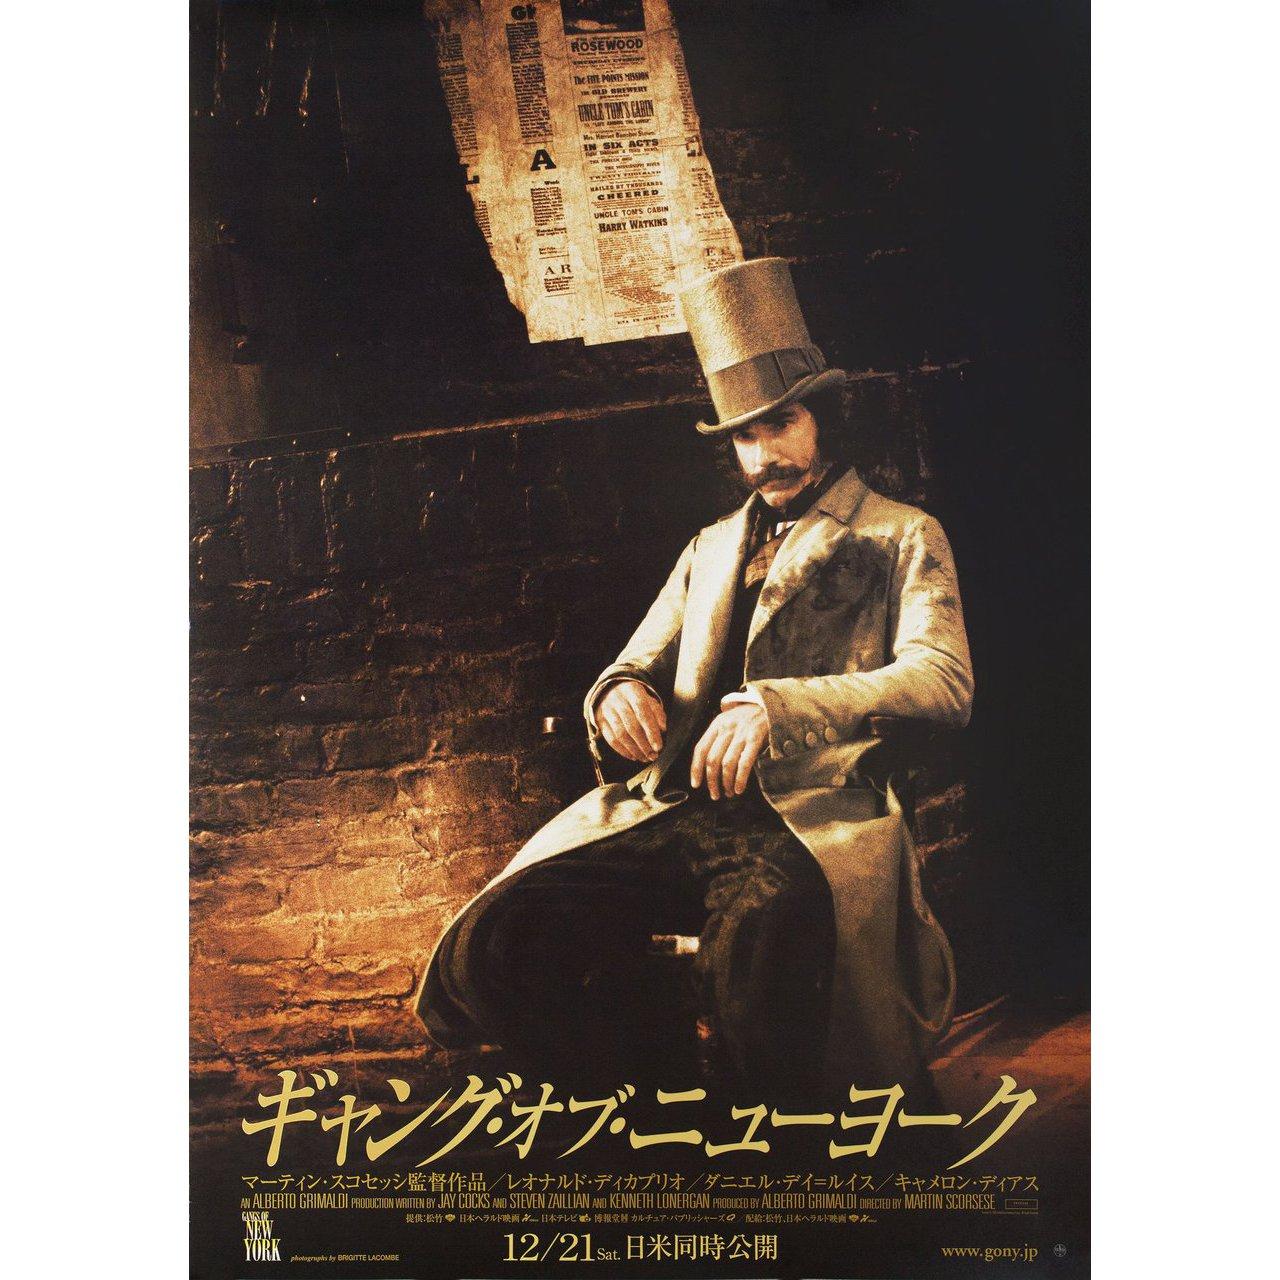 Original 2002 Japanese B1 poster for the film Gangs of New York directed by Martin Scorsese with Leonardo DiCaprio / Daniel Day-Lewis / Cameron Diaz / Jim Broadbent. Very Good-Fine condition, rolled. Please note: the size is stated in inches and the